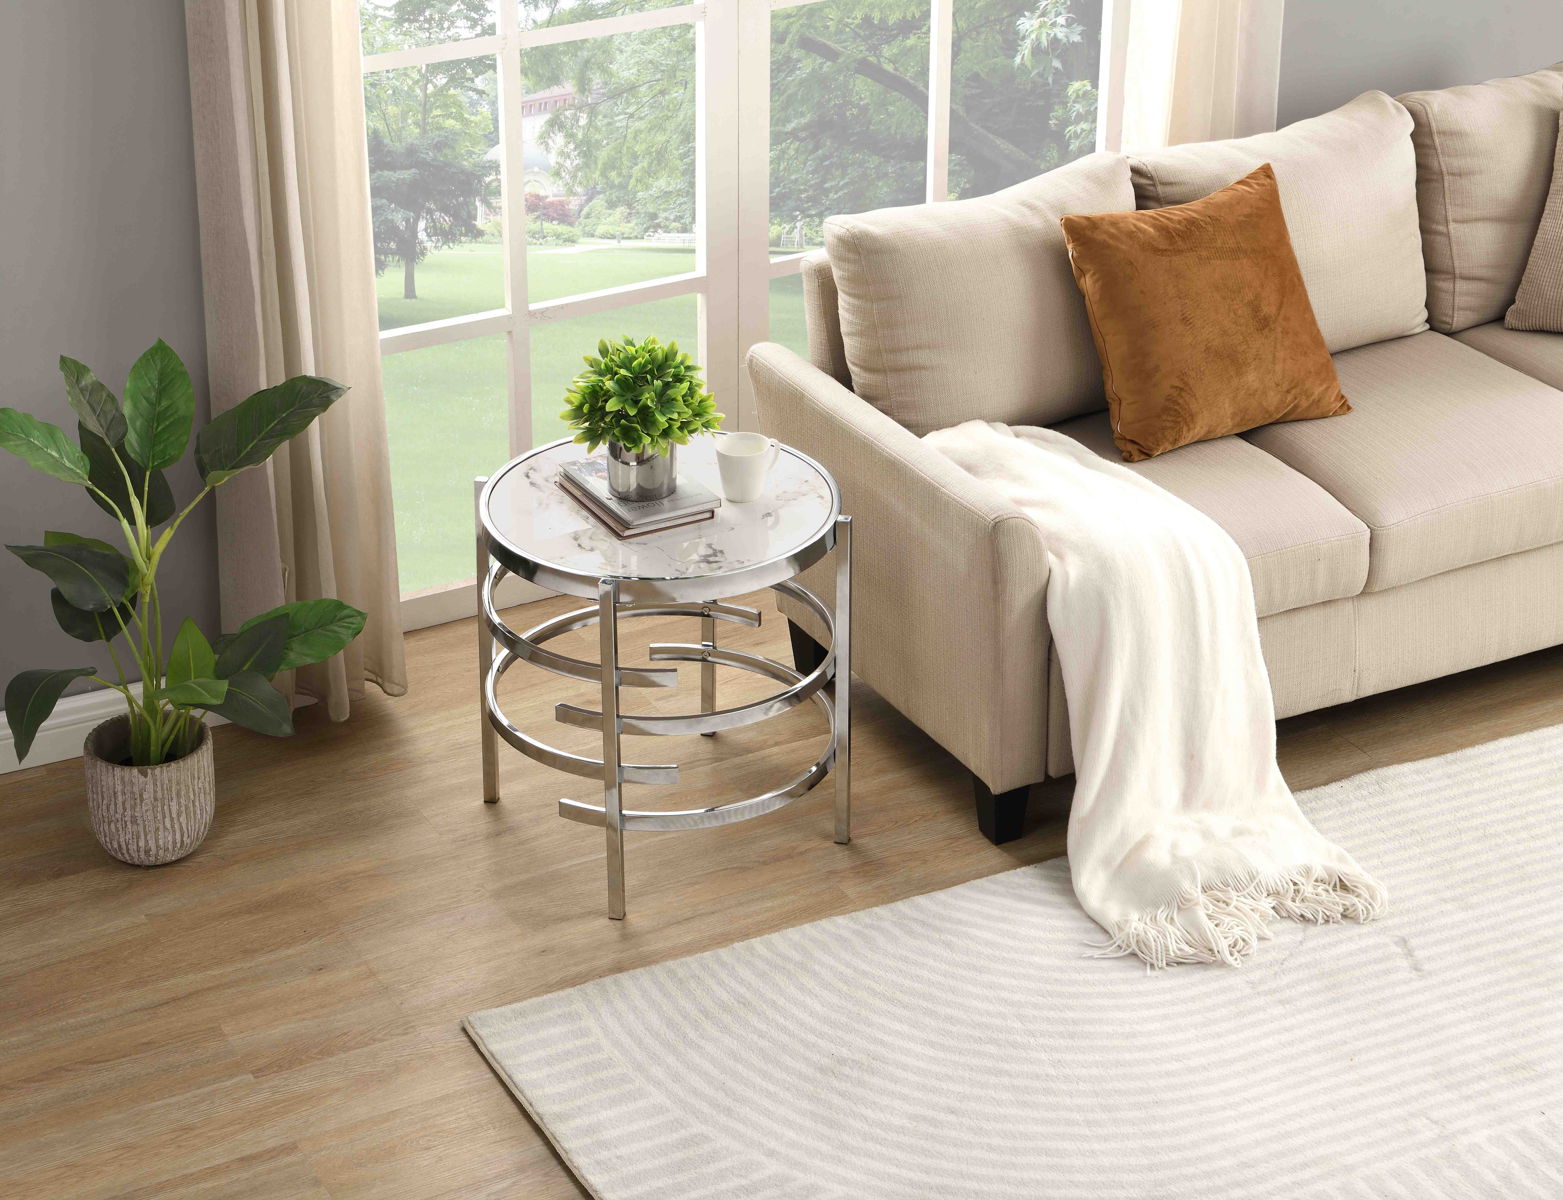 Modern Round End Table With Sintered Stone Top, Chrome/ Silver End Table For Living Room